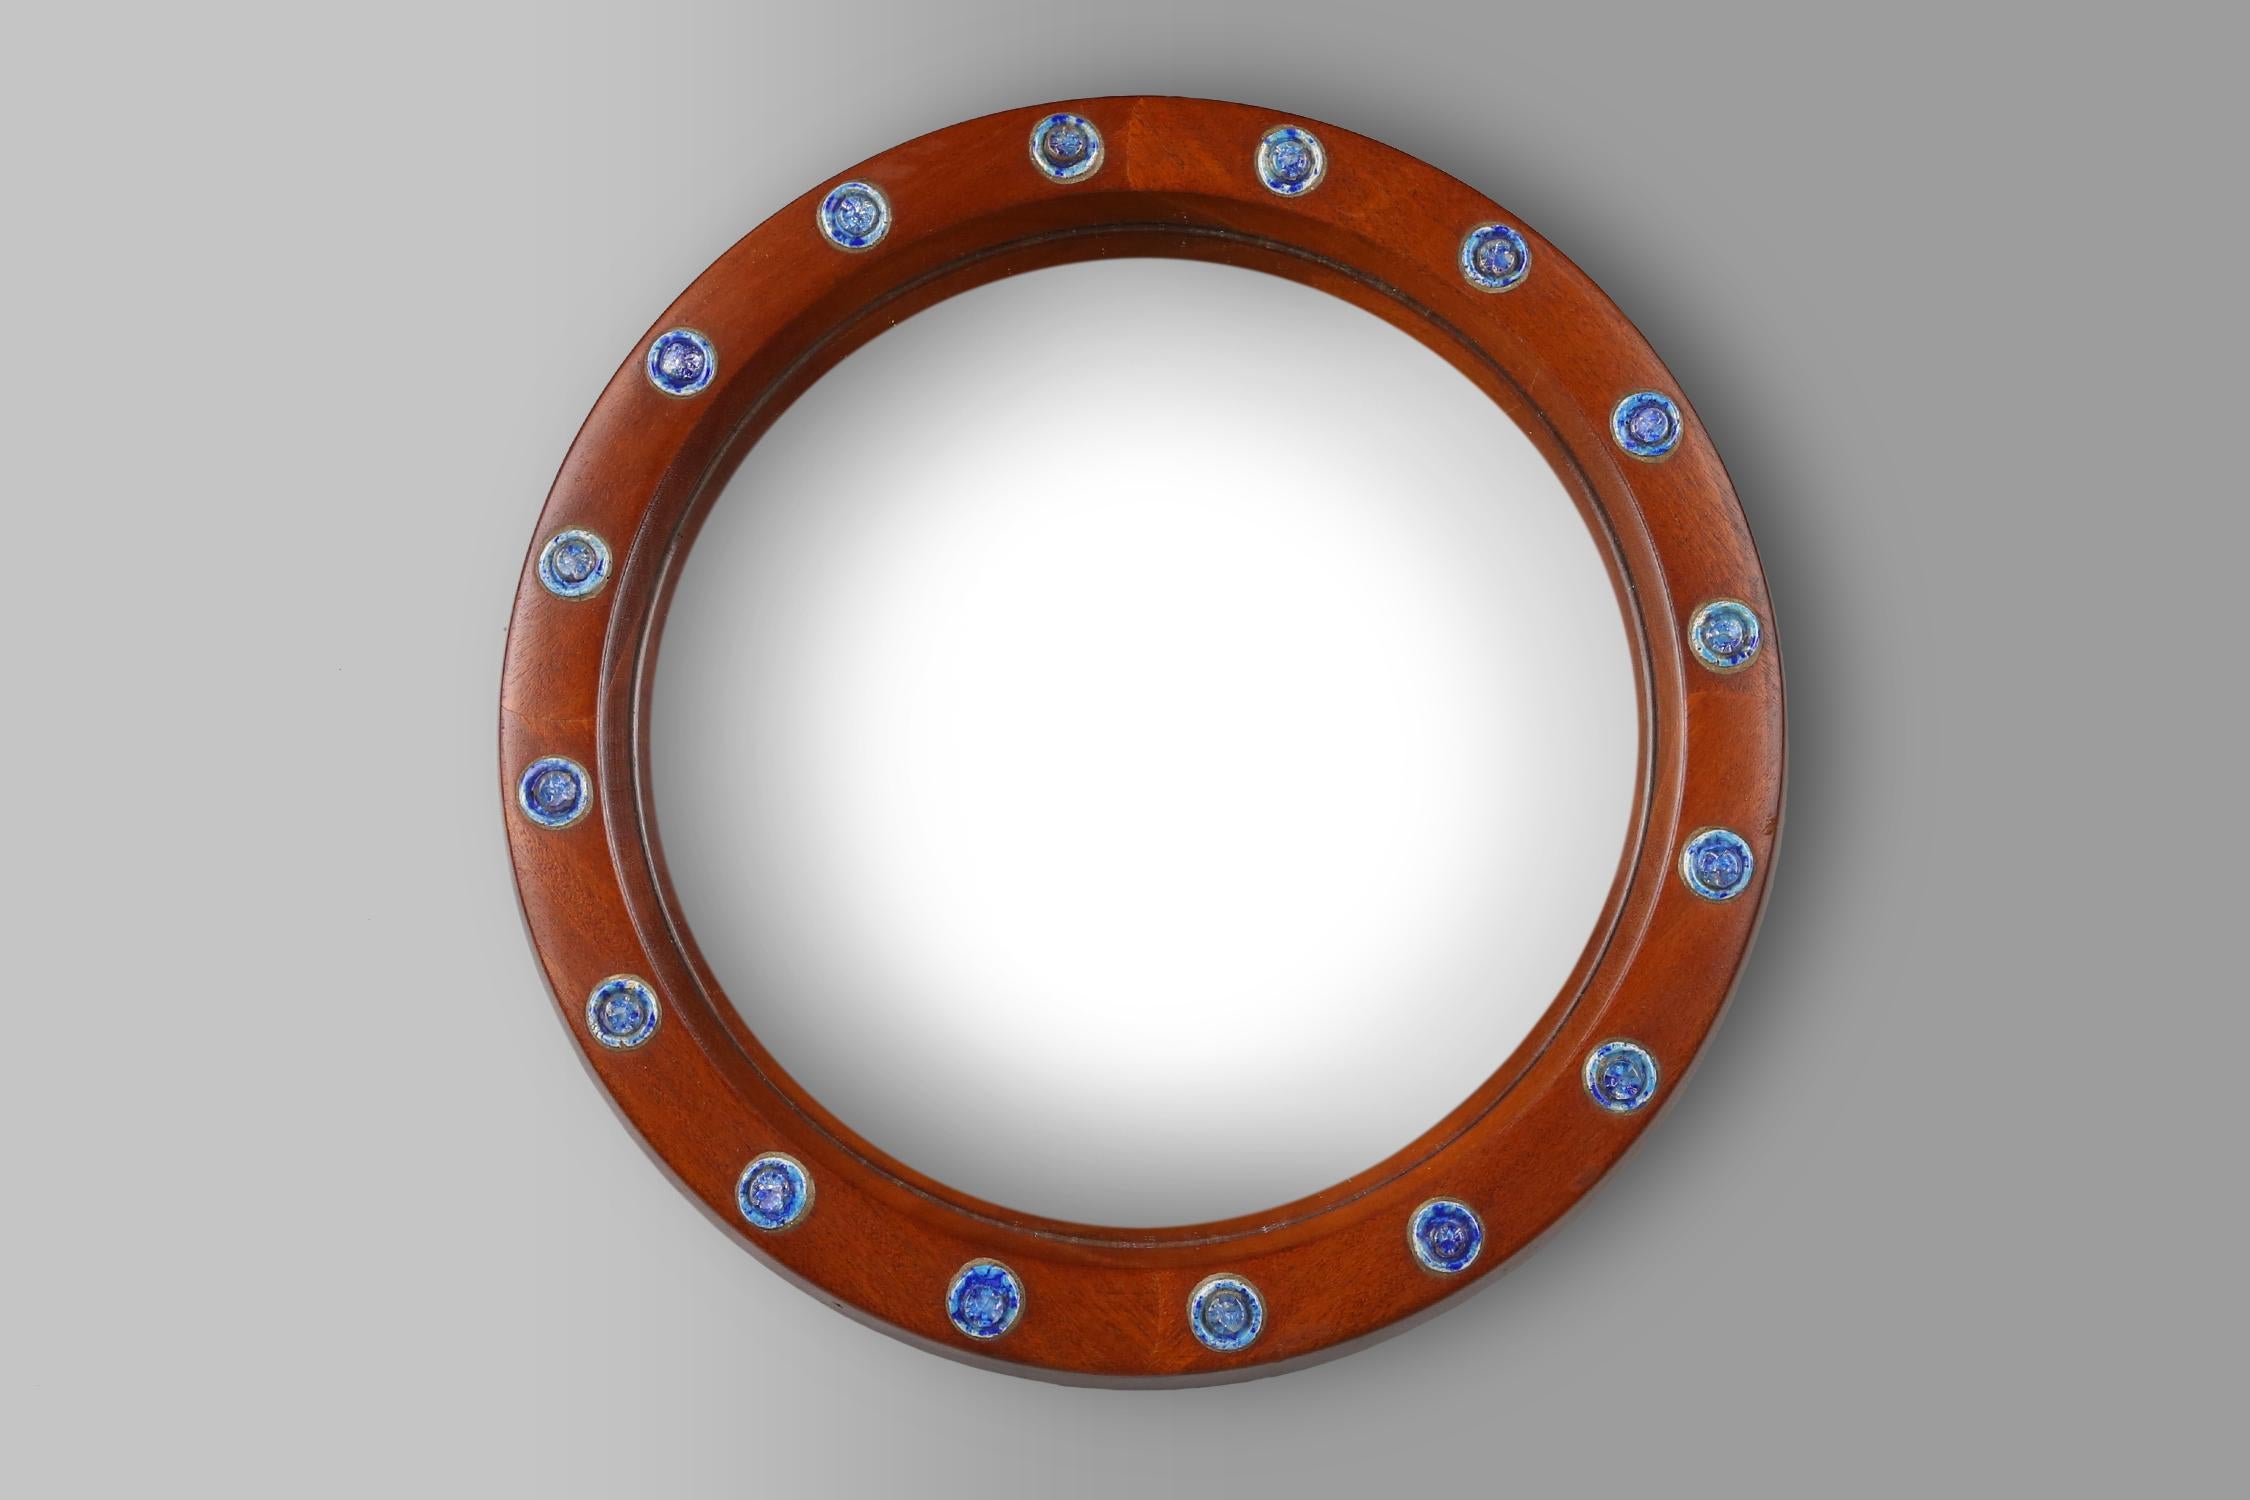 
France / 1960s / wooden mirror with blue and white glass decoration / mid-century / vintage design

Elegant and charming round mirror designed in France in the 1960s. Highly decorative mirror made in natural materials and finished with eye for